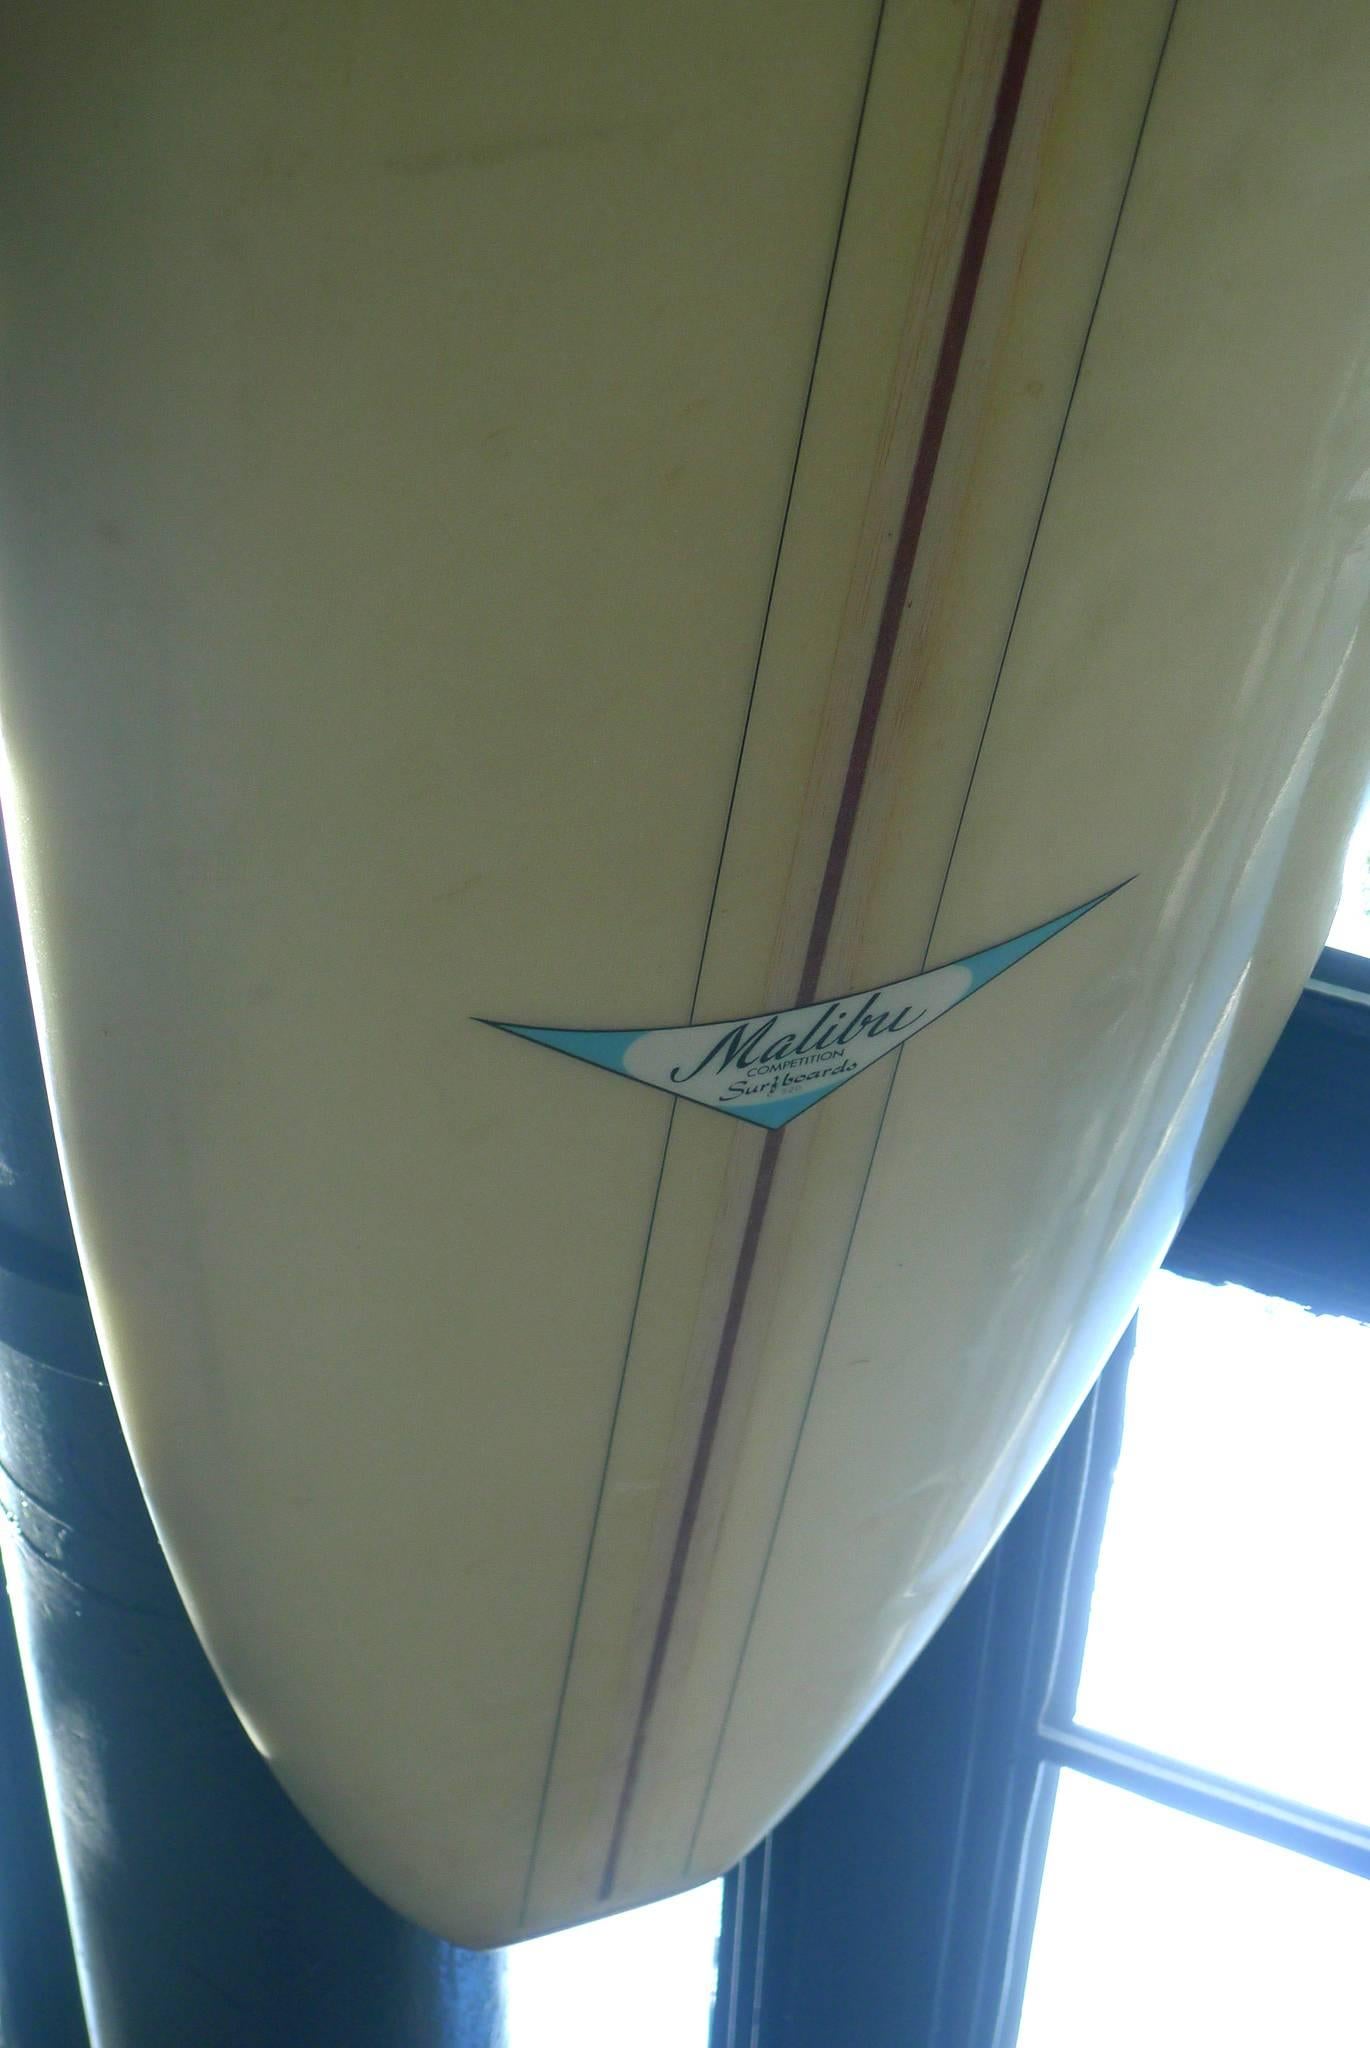 competition surfboards